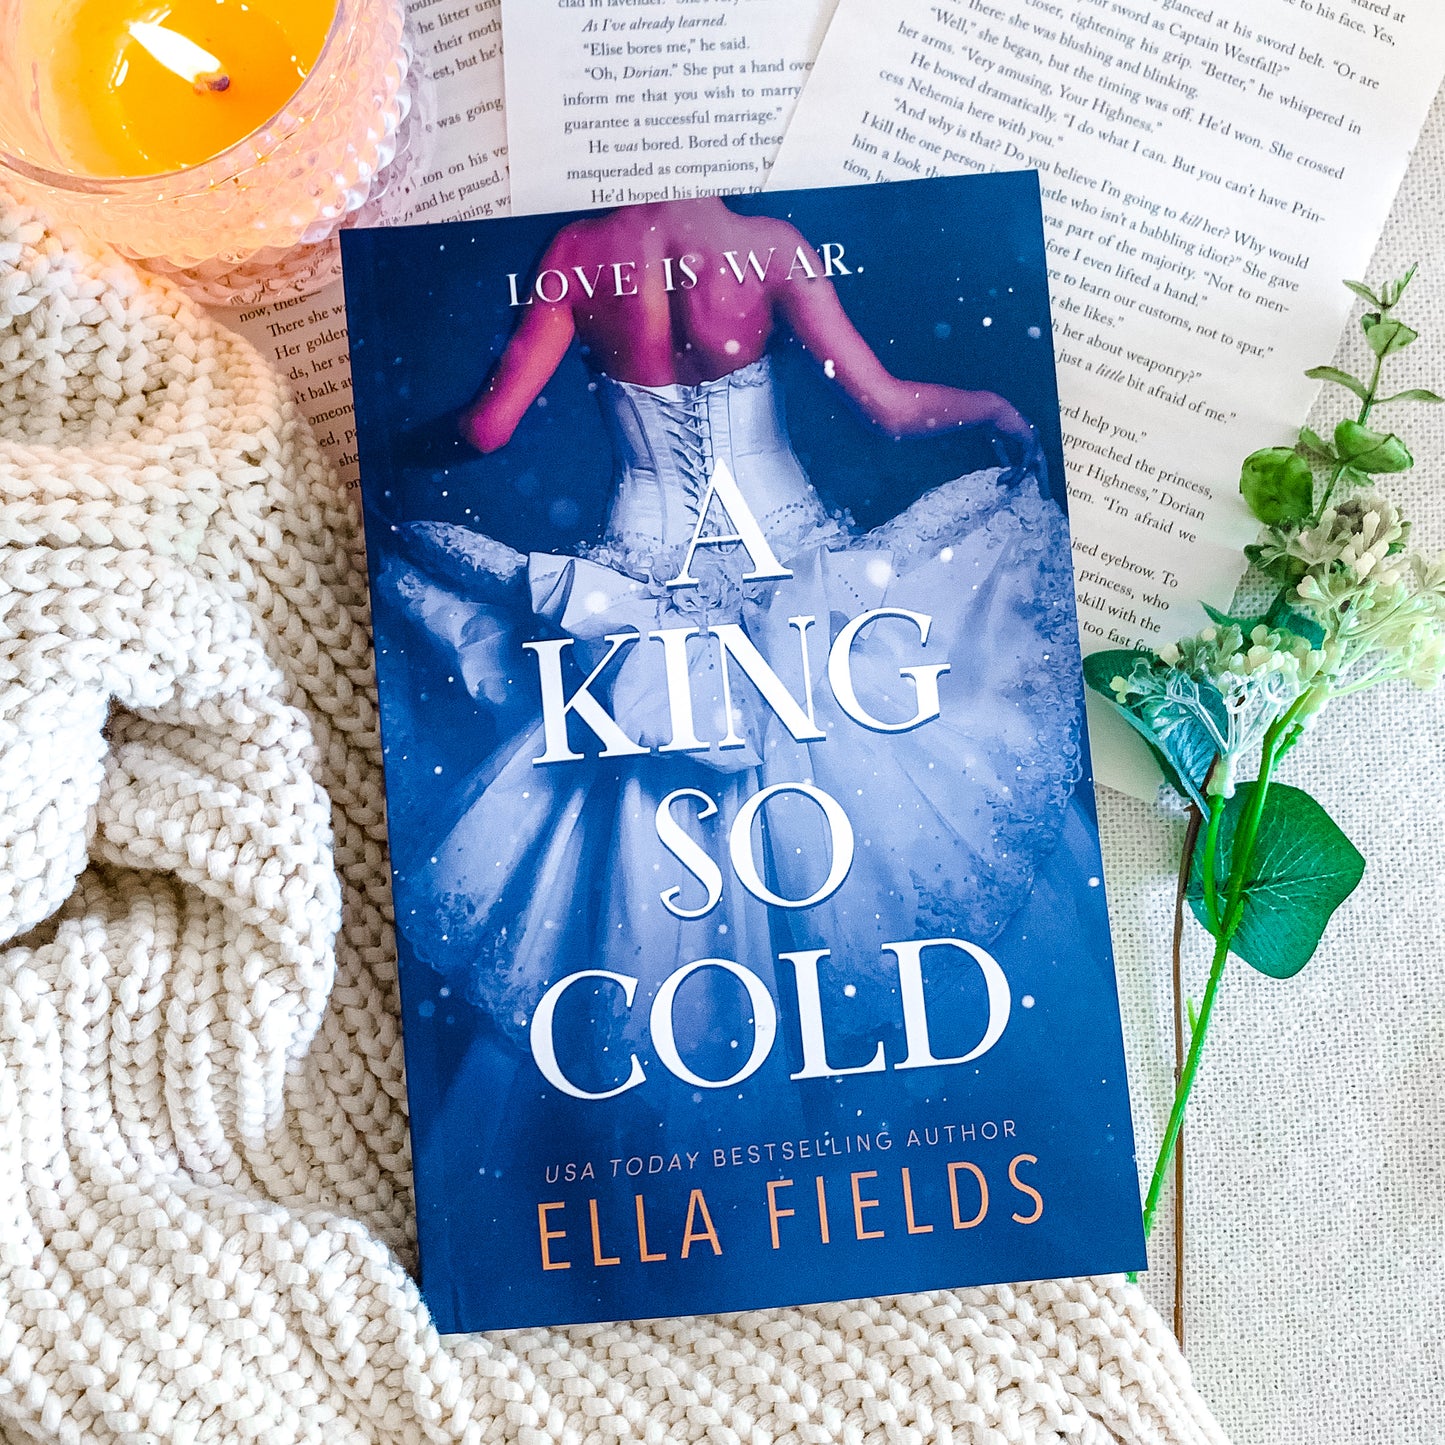 Royals Duology by Ella Fields